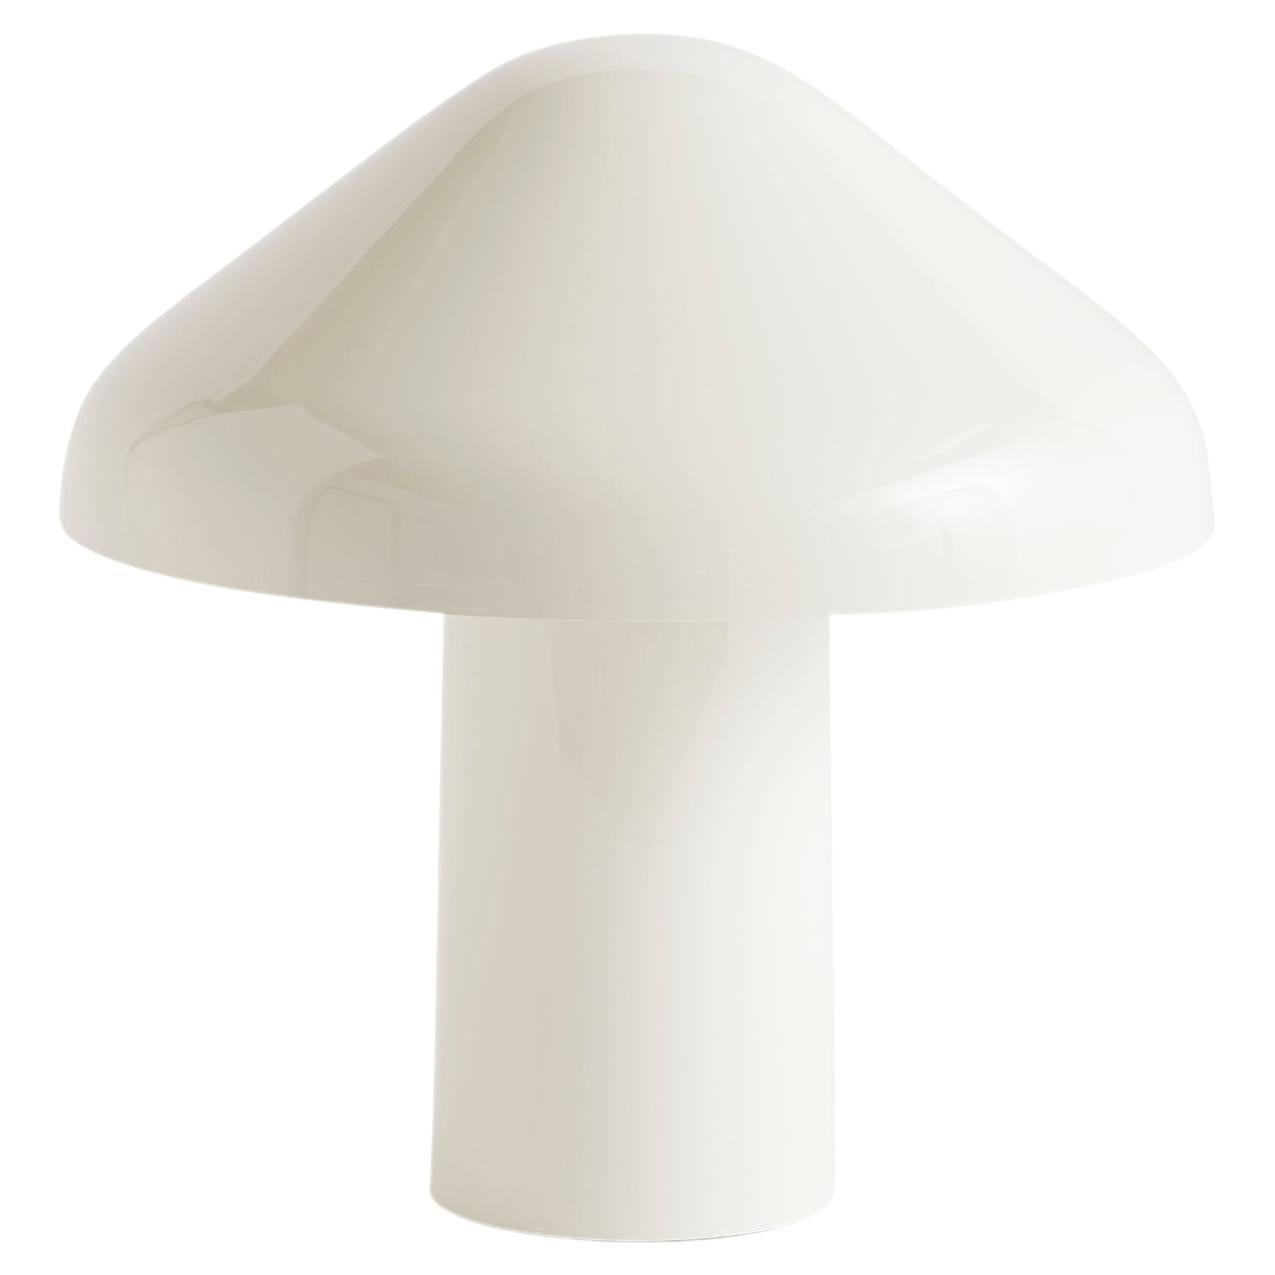 Pao Portable Lamp, Cream White, by Naoto Fukasawa, for Hay For Sale